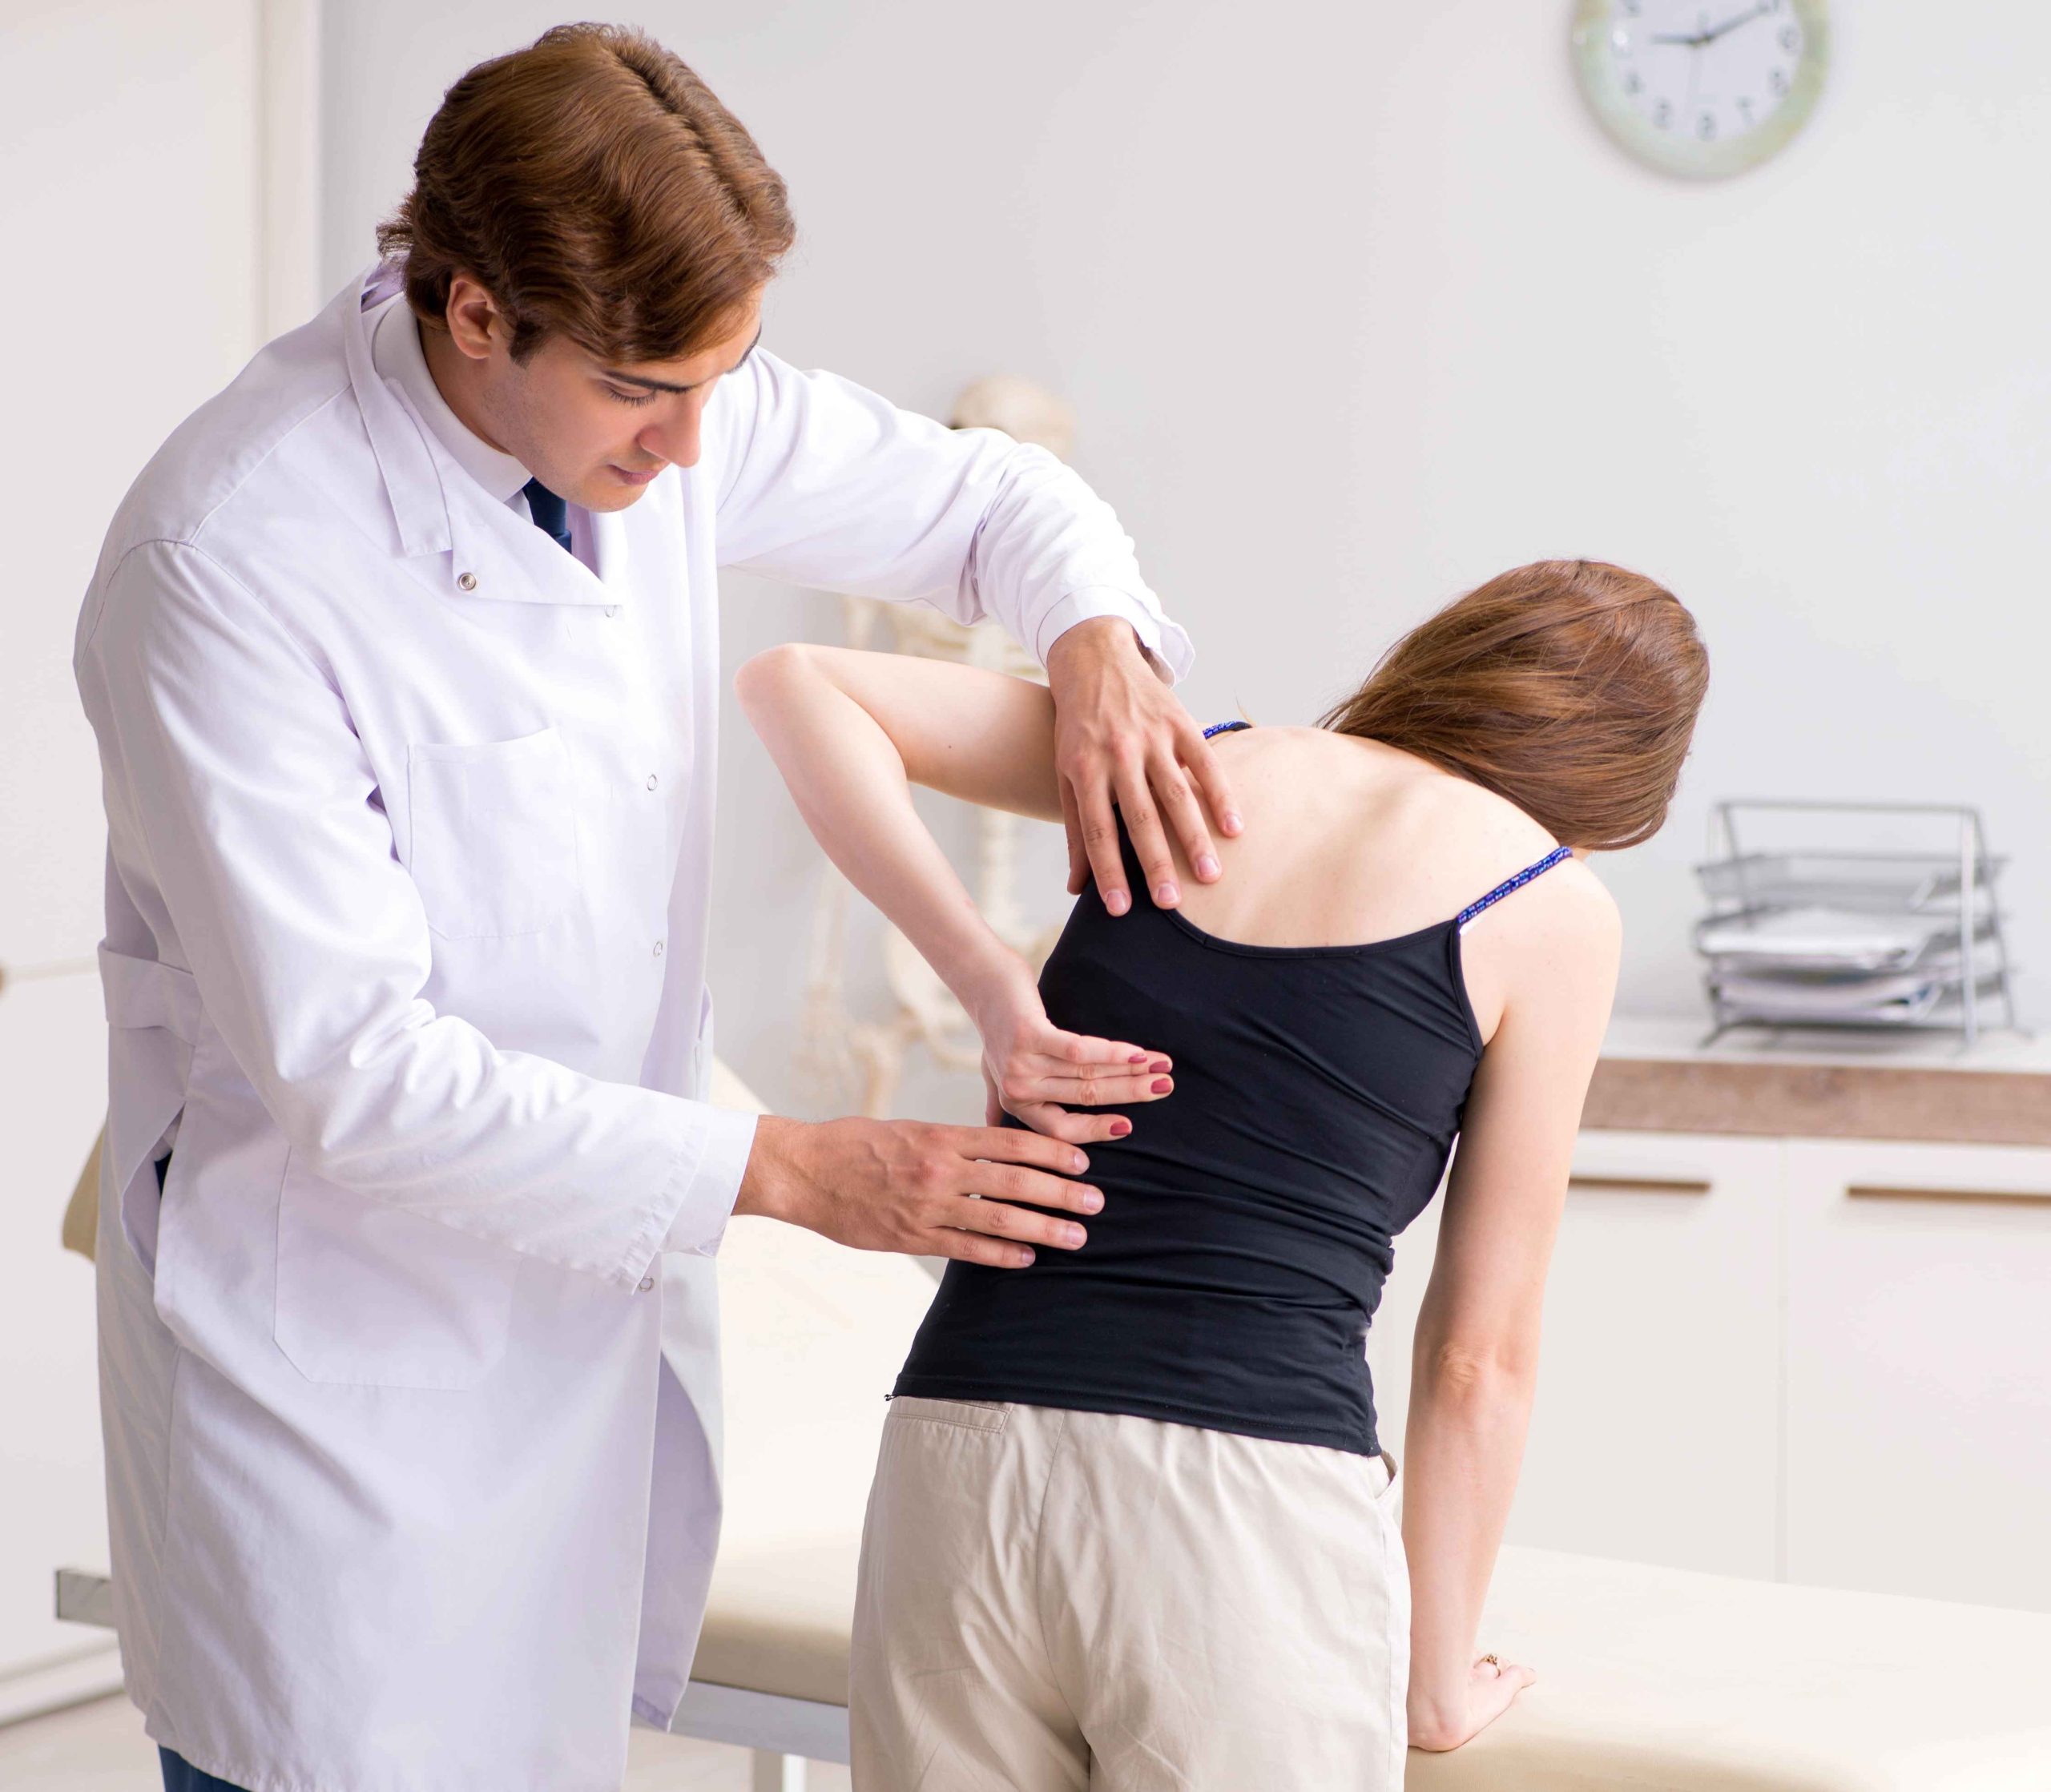  How to Find a Chiropractor Near Me In Shreveport